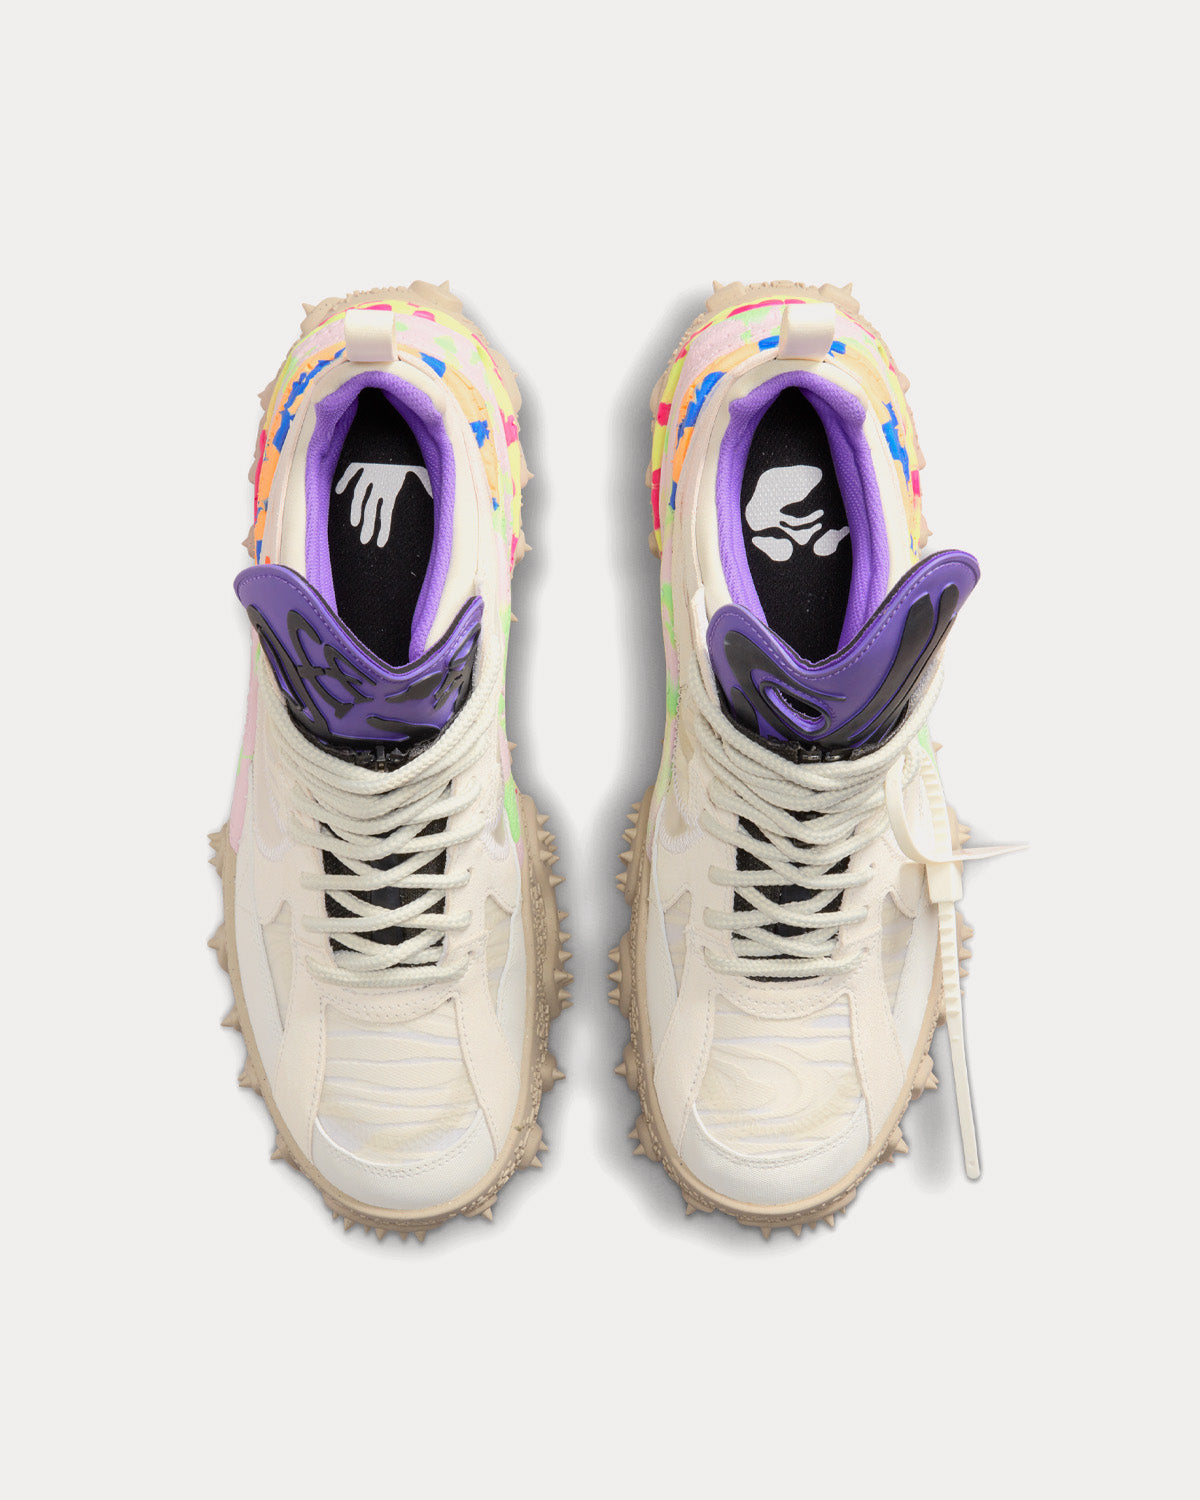 Nike x Off-White - Terra Forma Summit White and Psychic Purple Low Top Sneakers